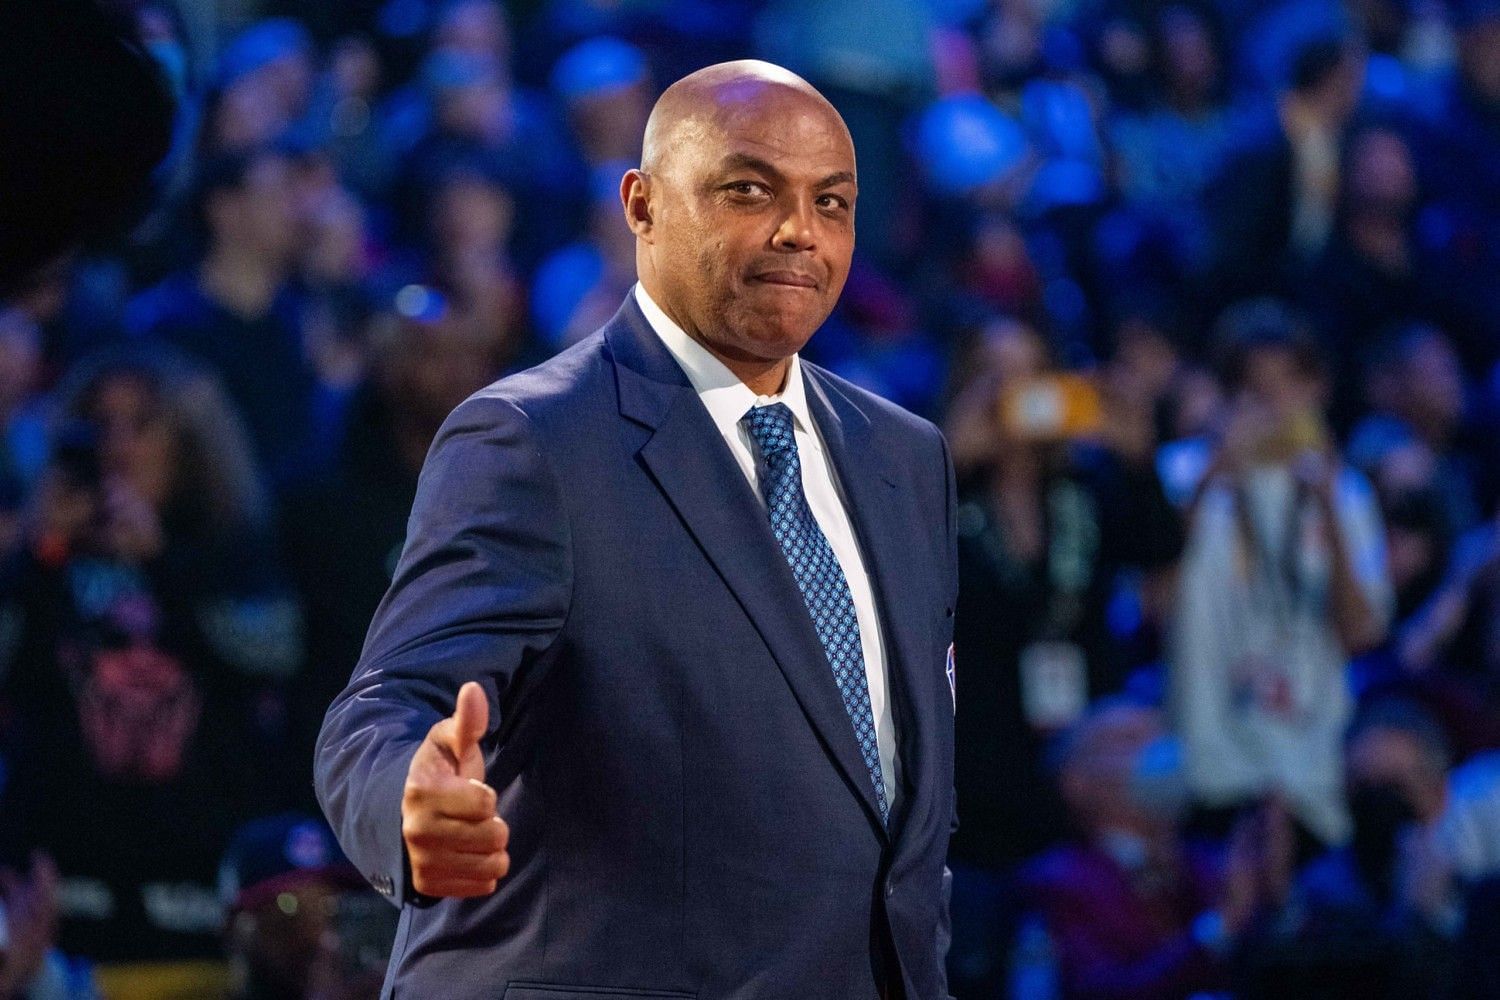 NBA legend and current Inside the NBA analyst Charles Barkley